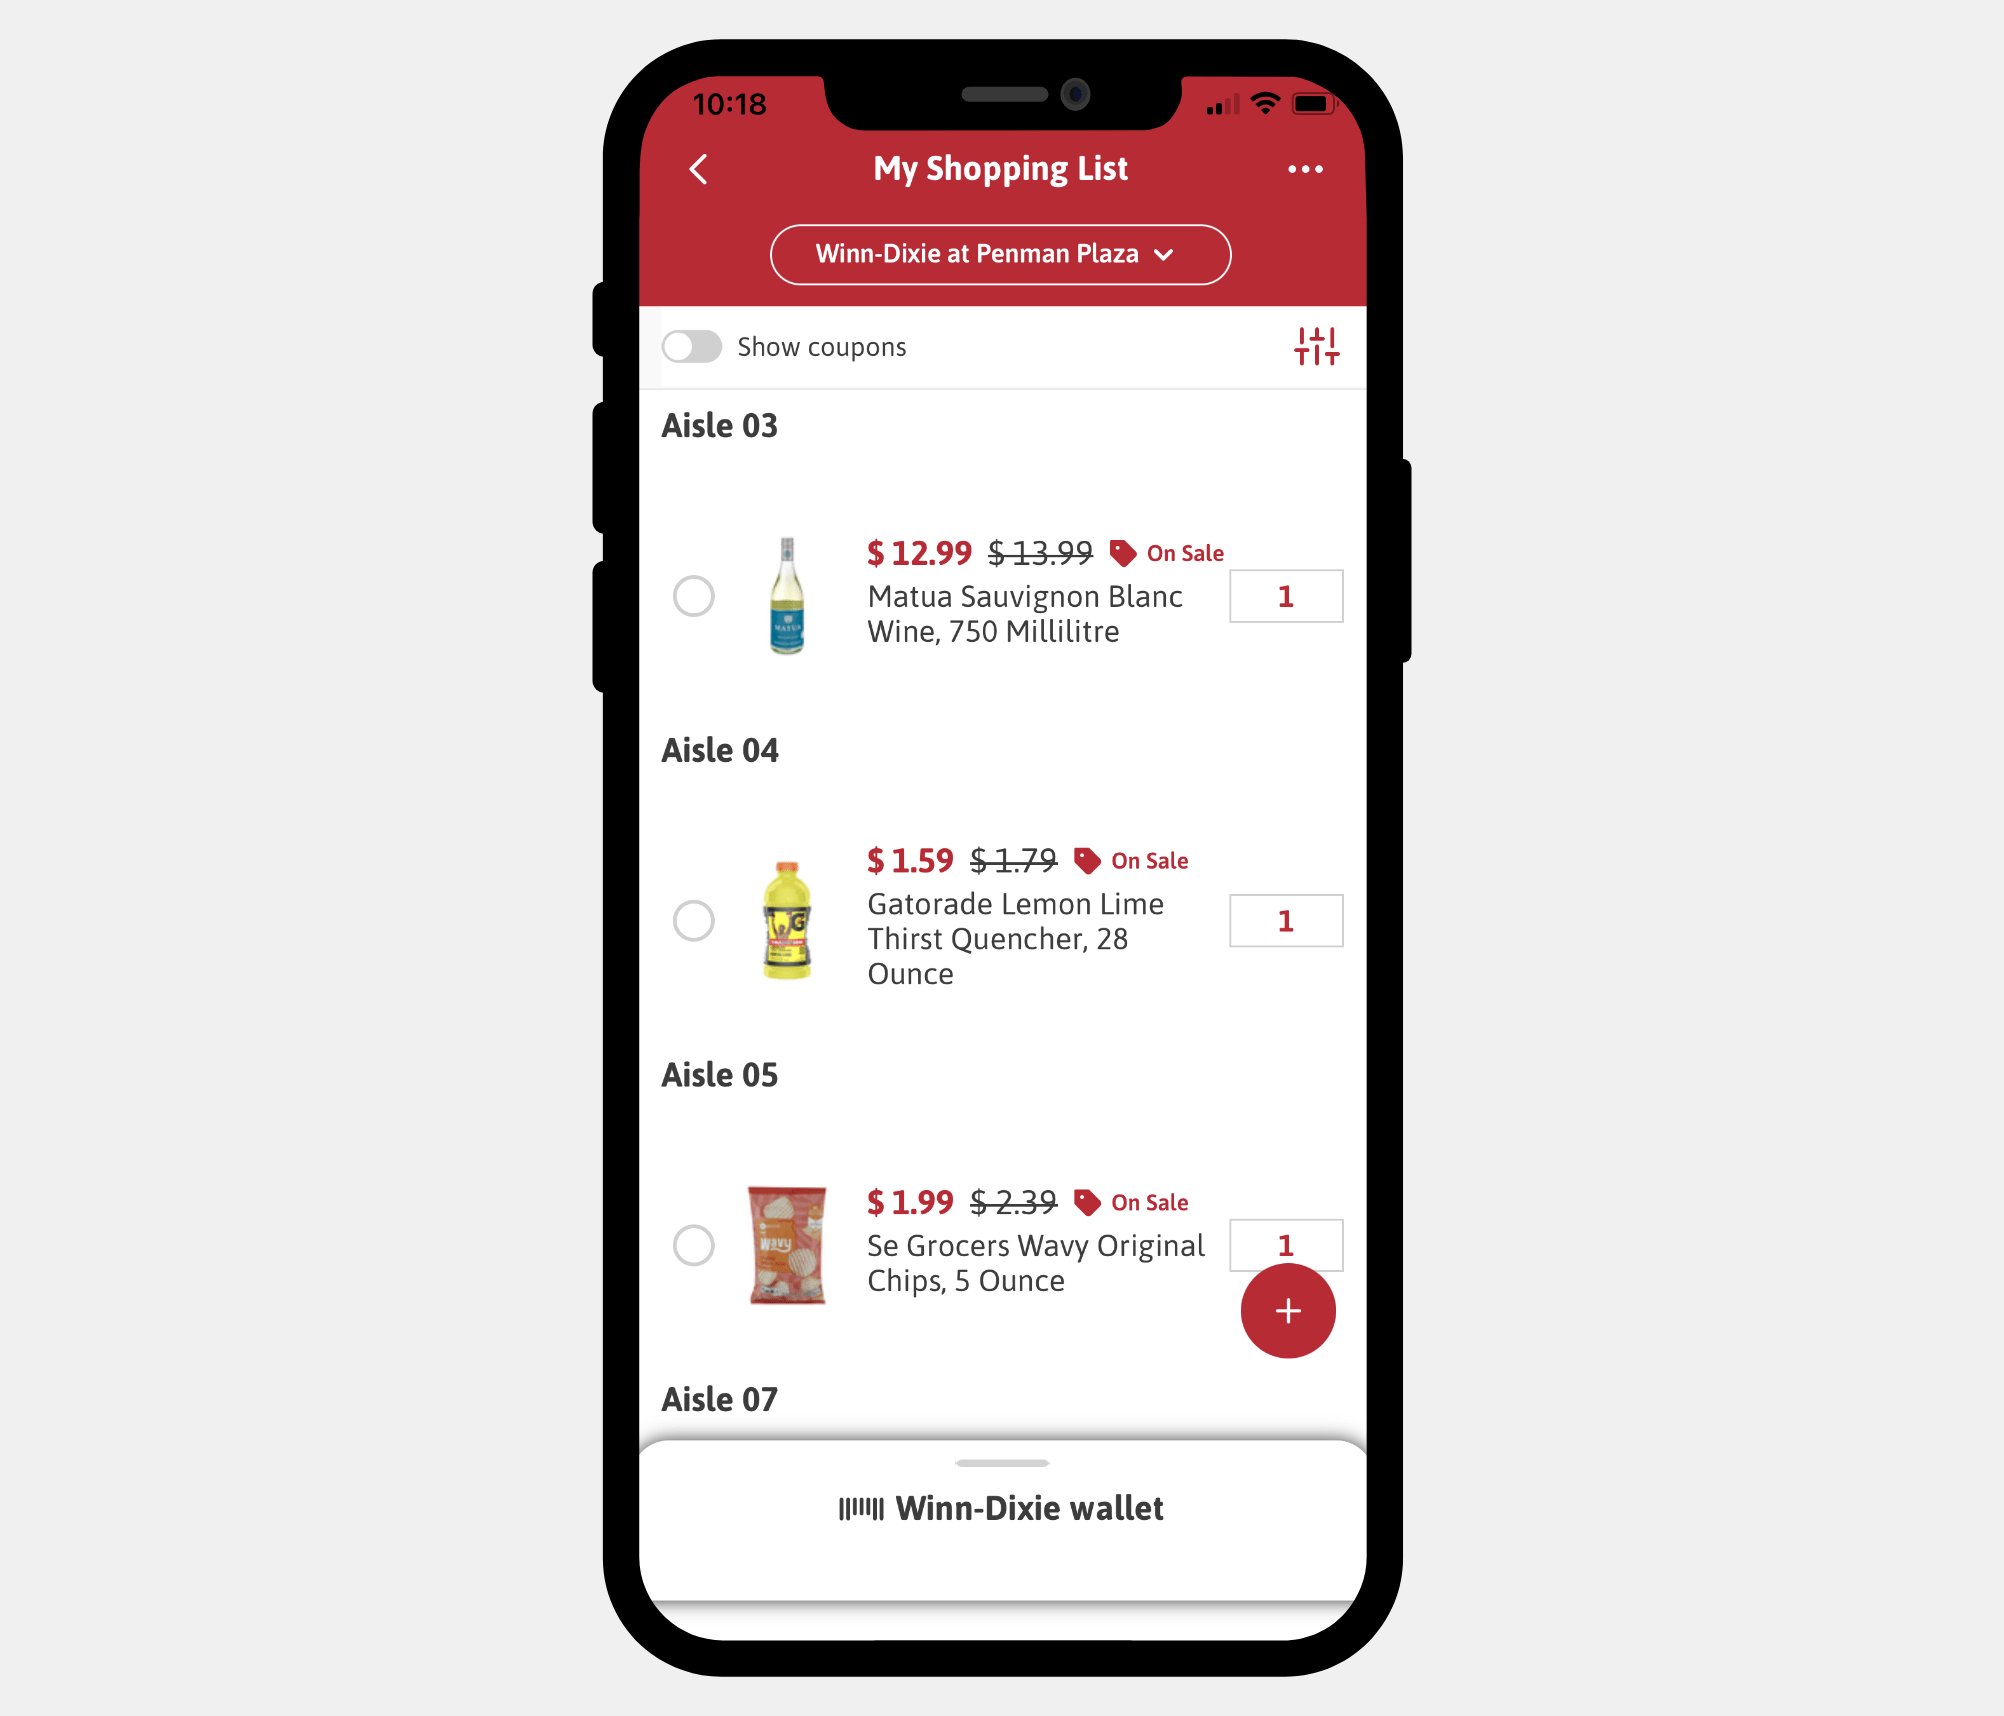 Image of the shopping list feature on the Winn-Dixie app